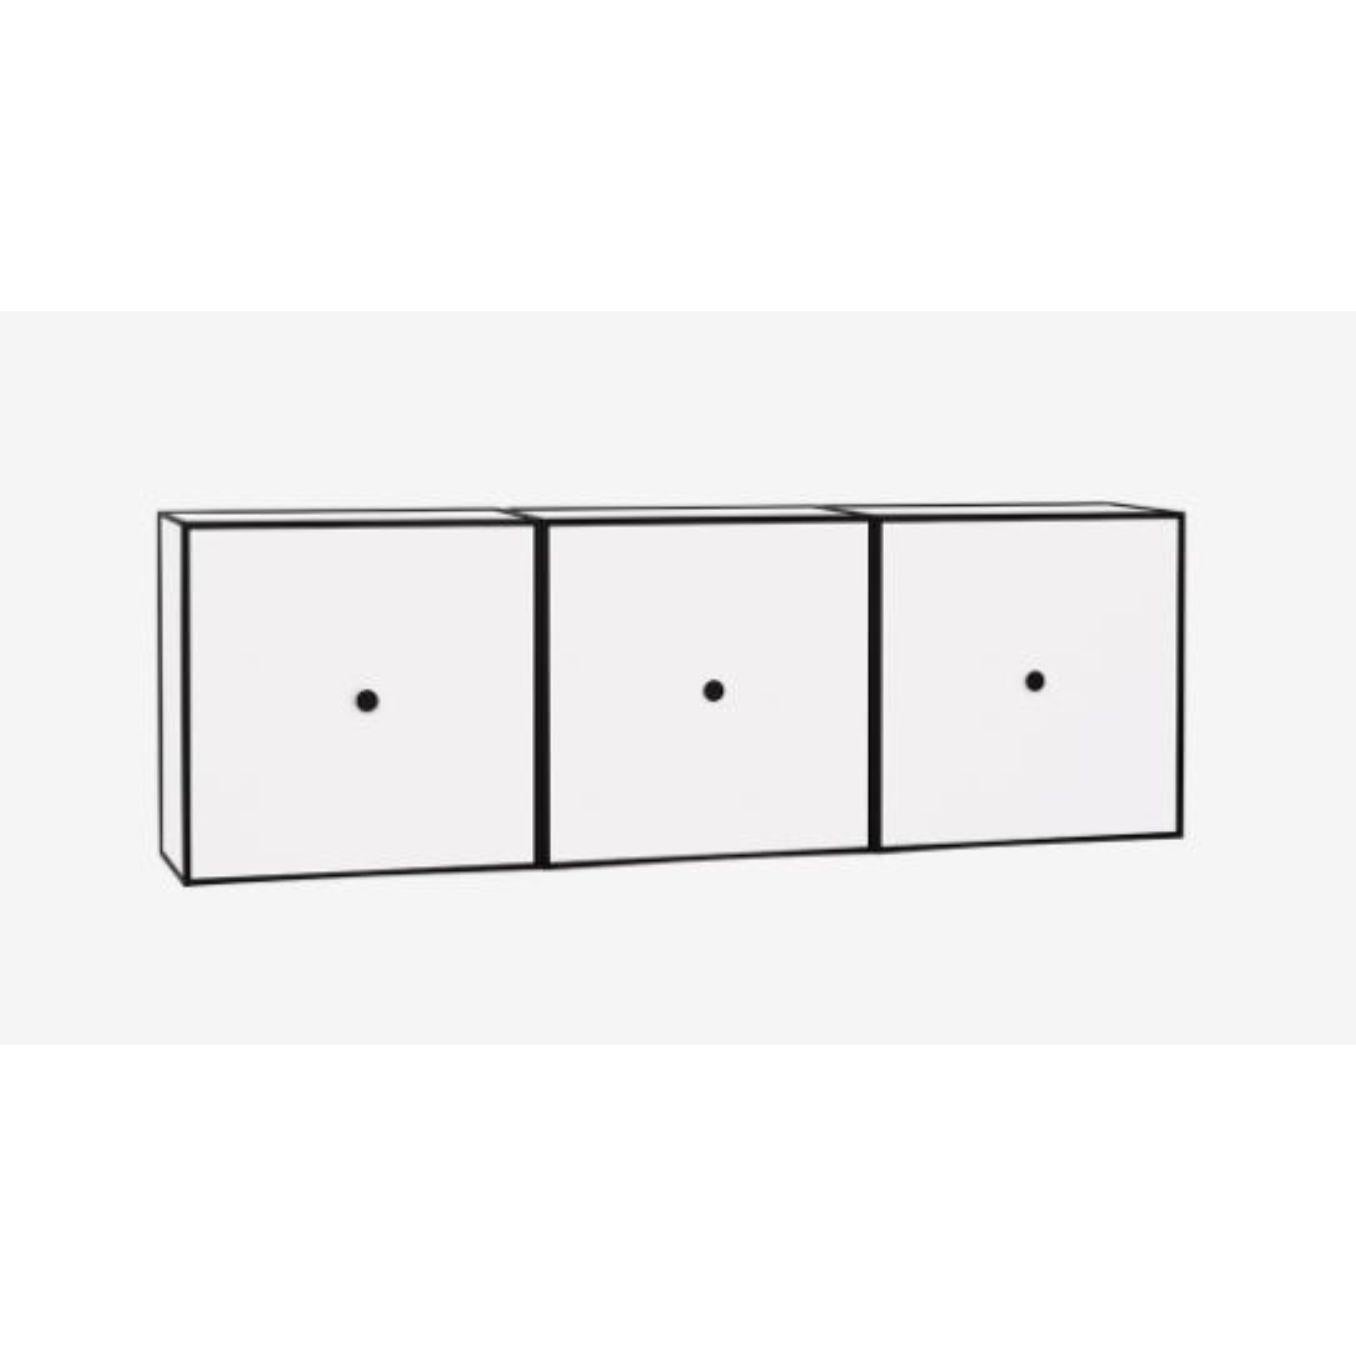 42 white frame view box by Lassen
Dimensions: D 126 x W 21 x H 42 cm 
Materials: Finér, melamin, melamine, metal, veneer
Also available in different colours and dimensions.
Weight: 22.80 kg

By Lassen is a Danish design brand focused on iconic